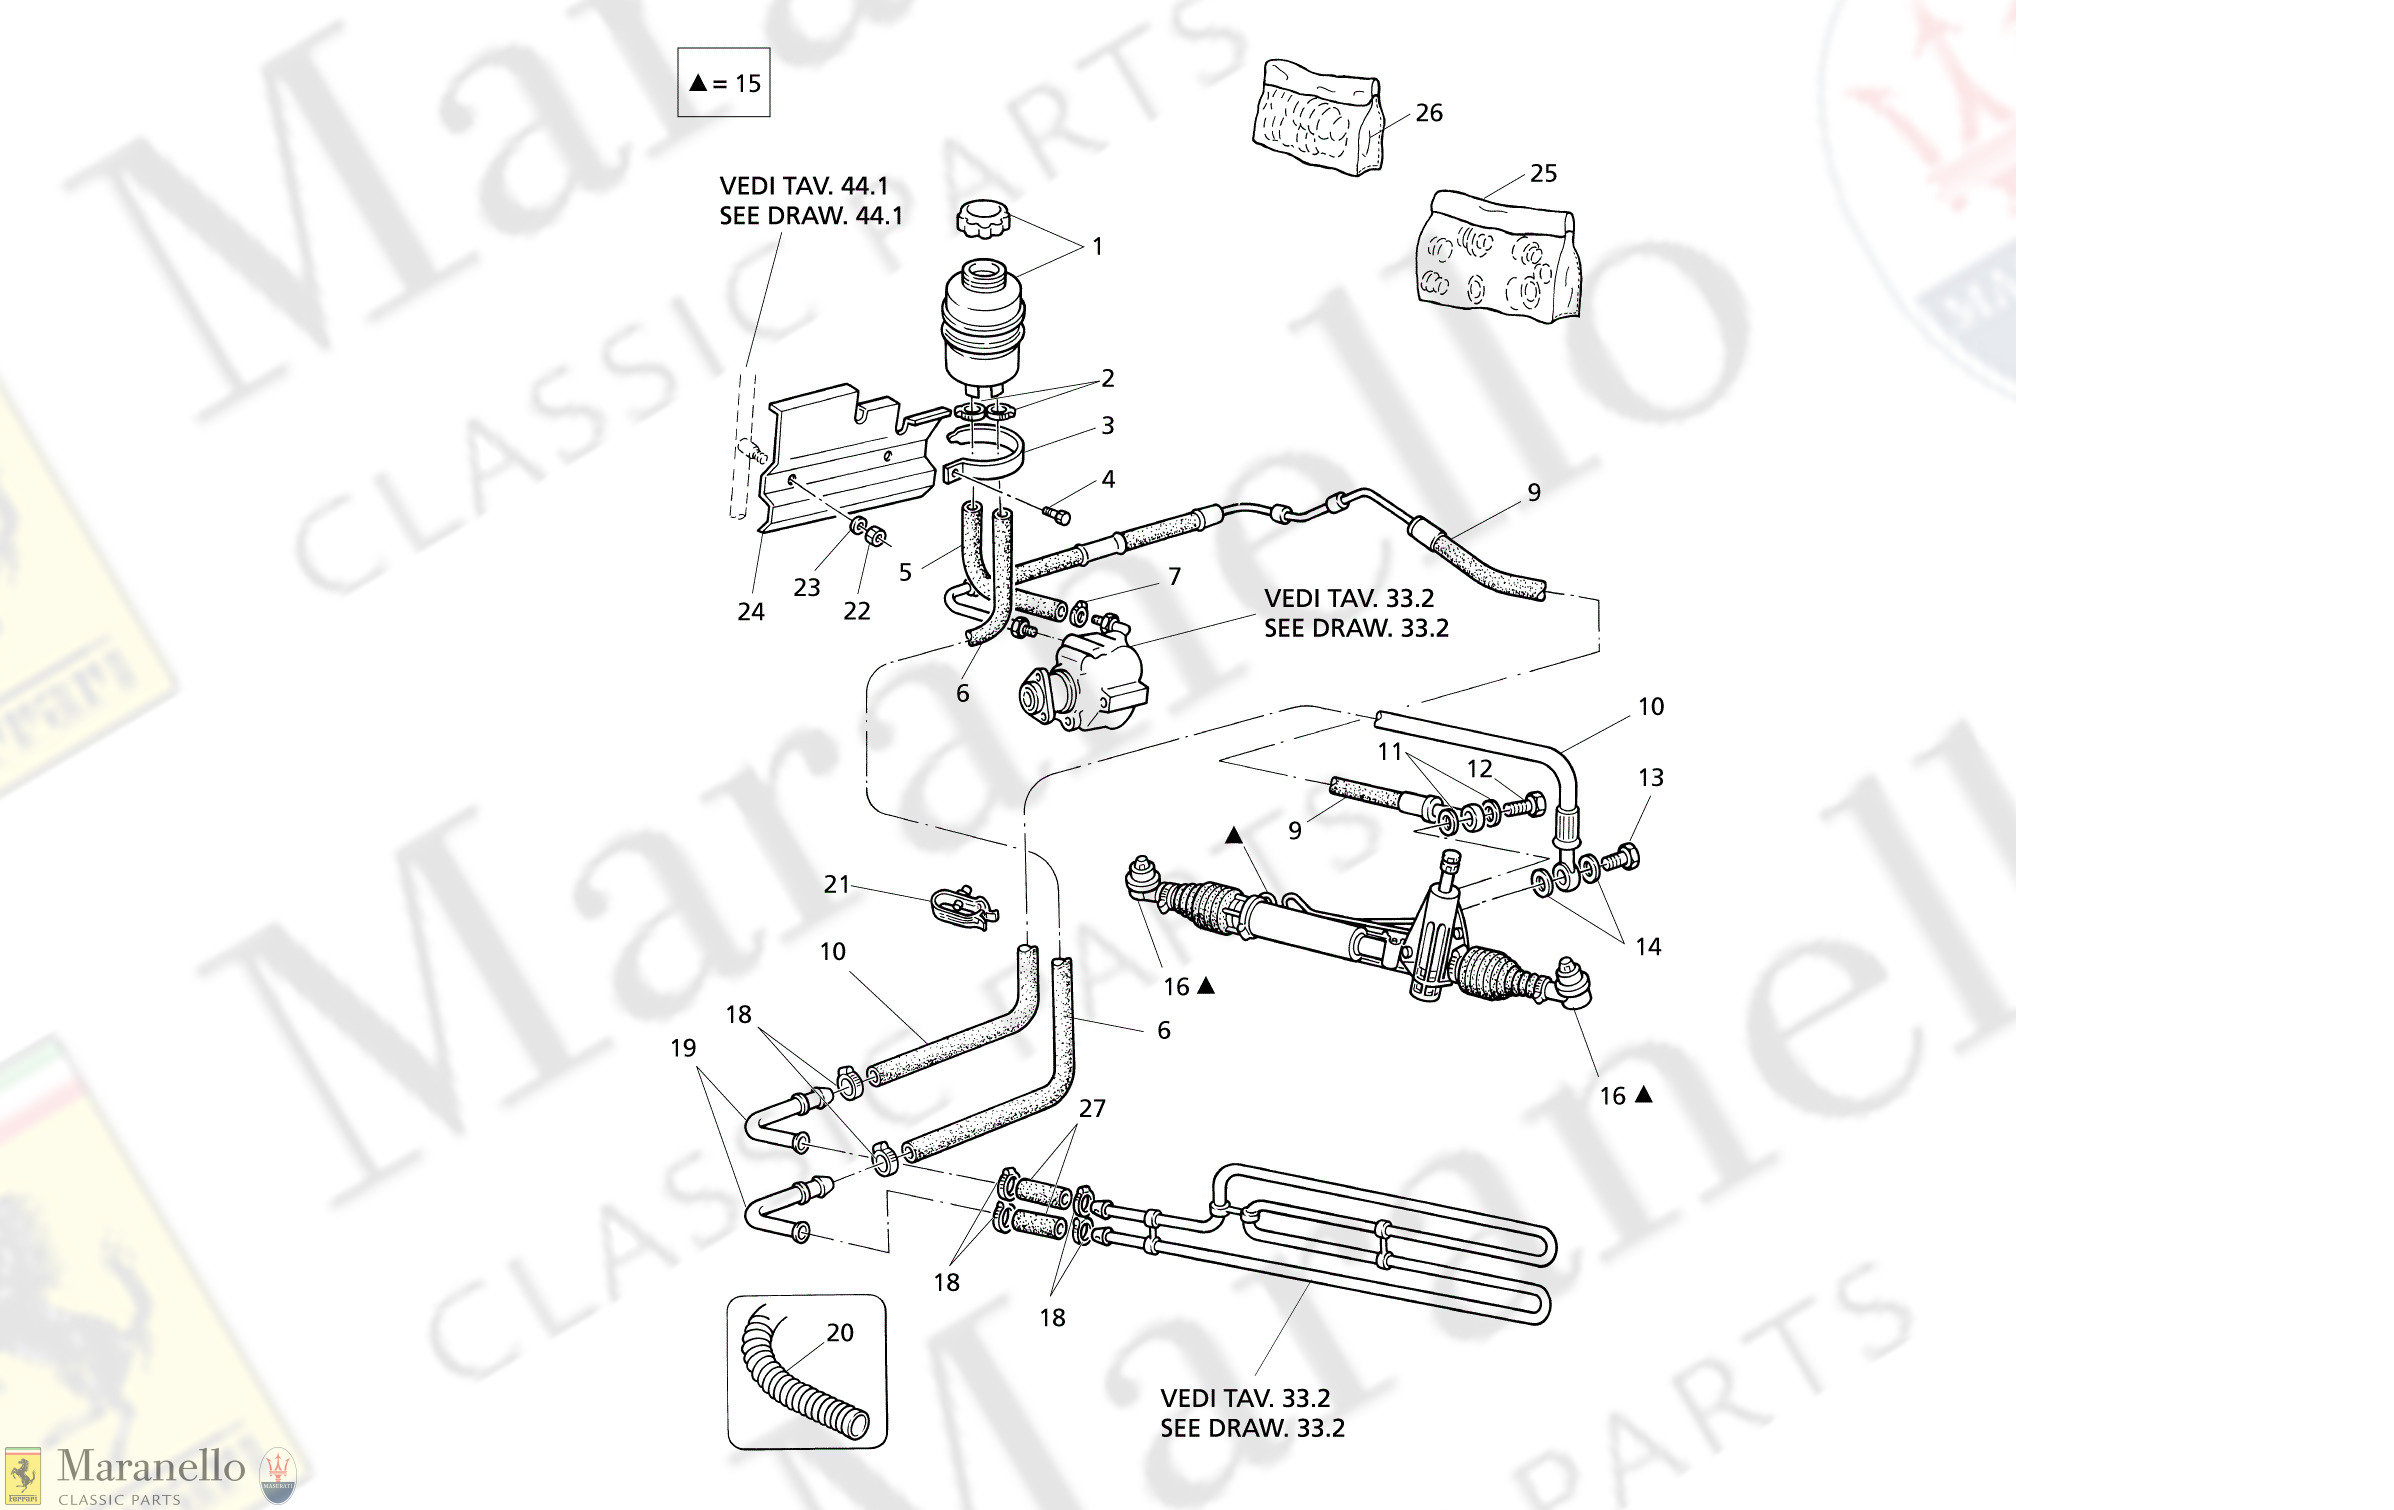 C 33 - Power Steering System (Lh Drive)